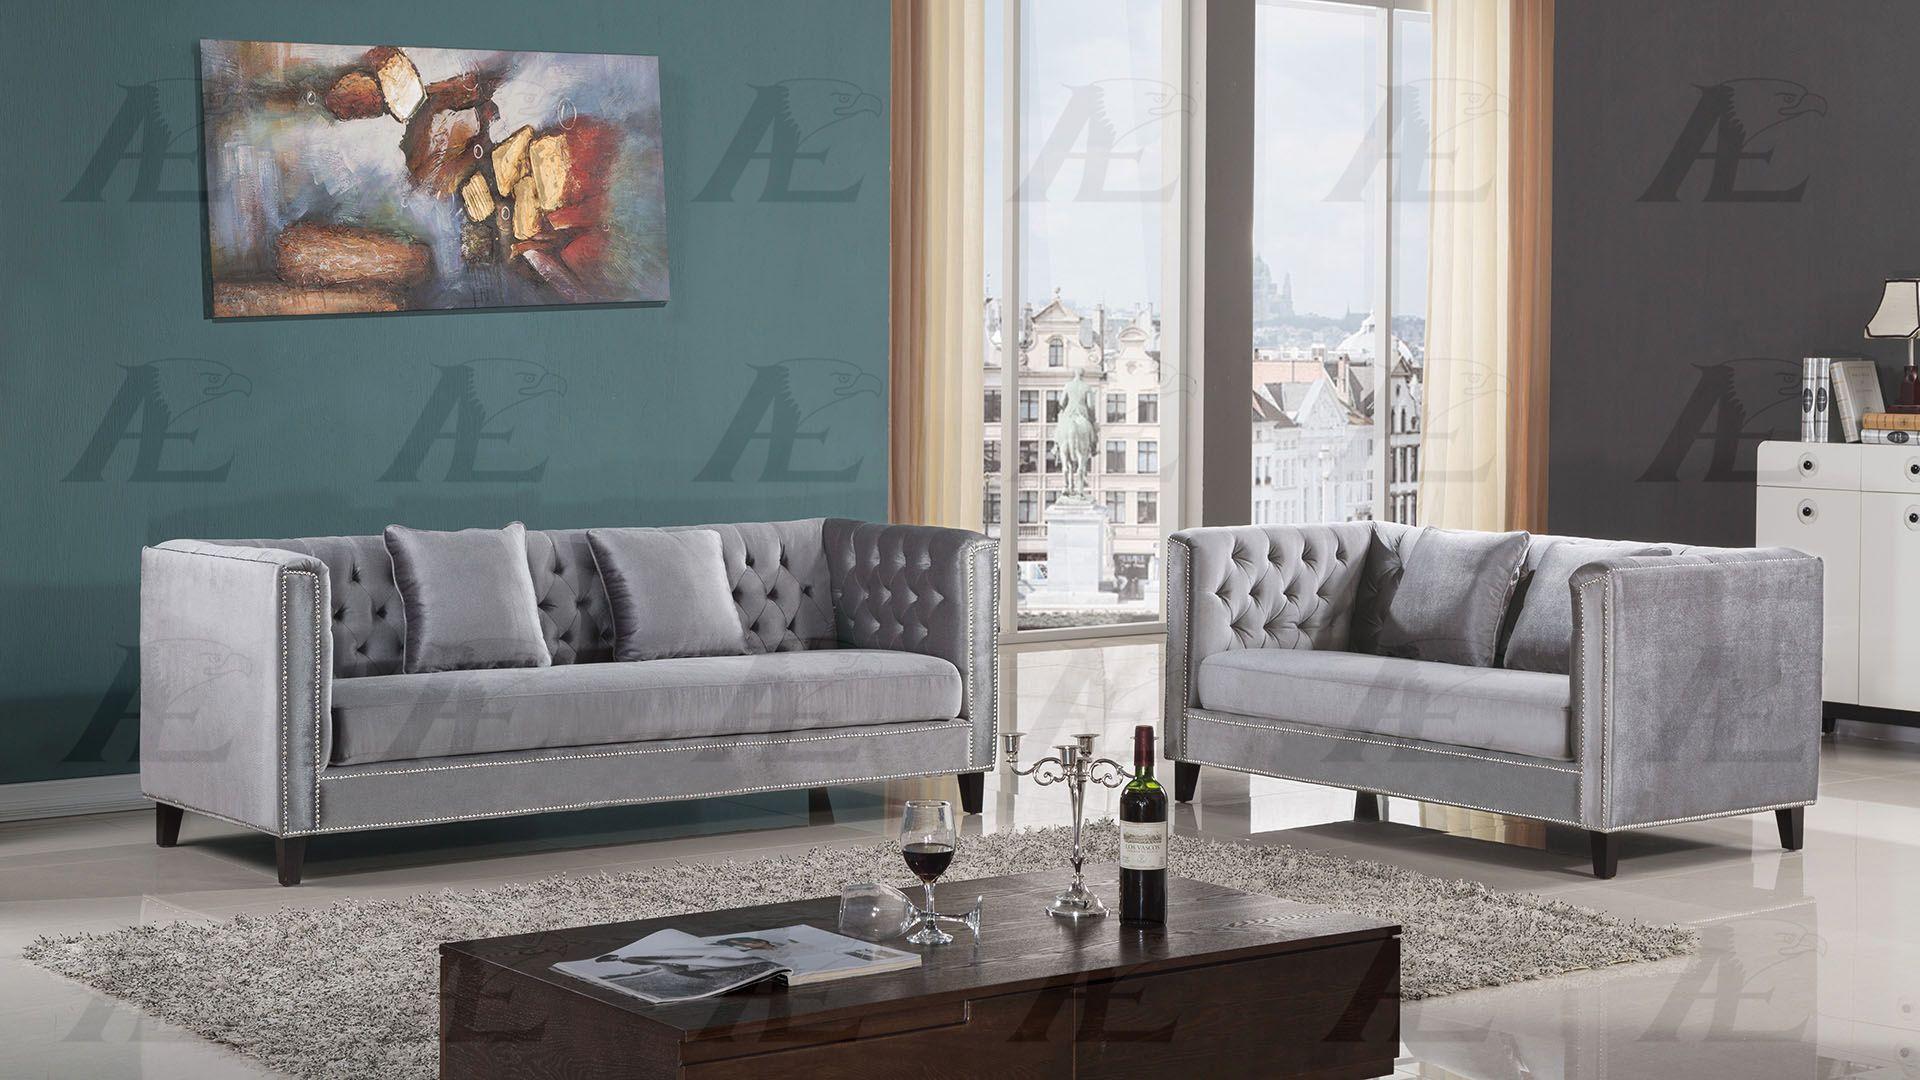 

    
American Eagle Furniture AE2373-GR Gray Fabric Sofa and Loveseat Set 2Pcs Contemporary
